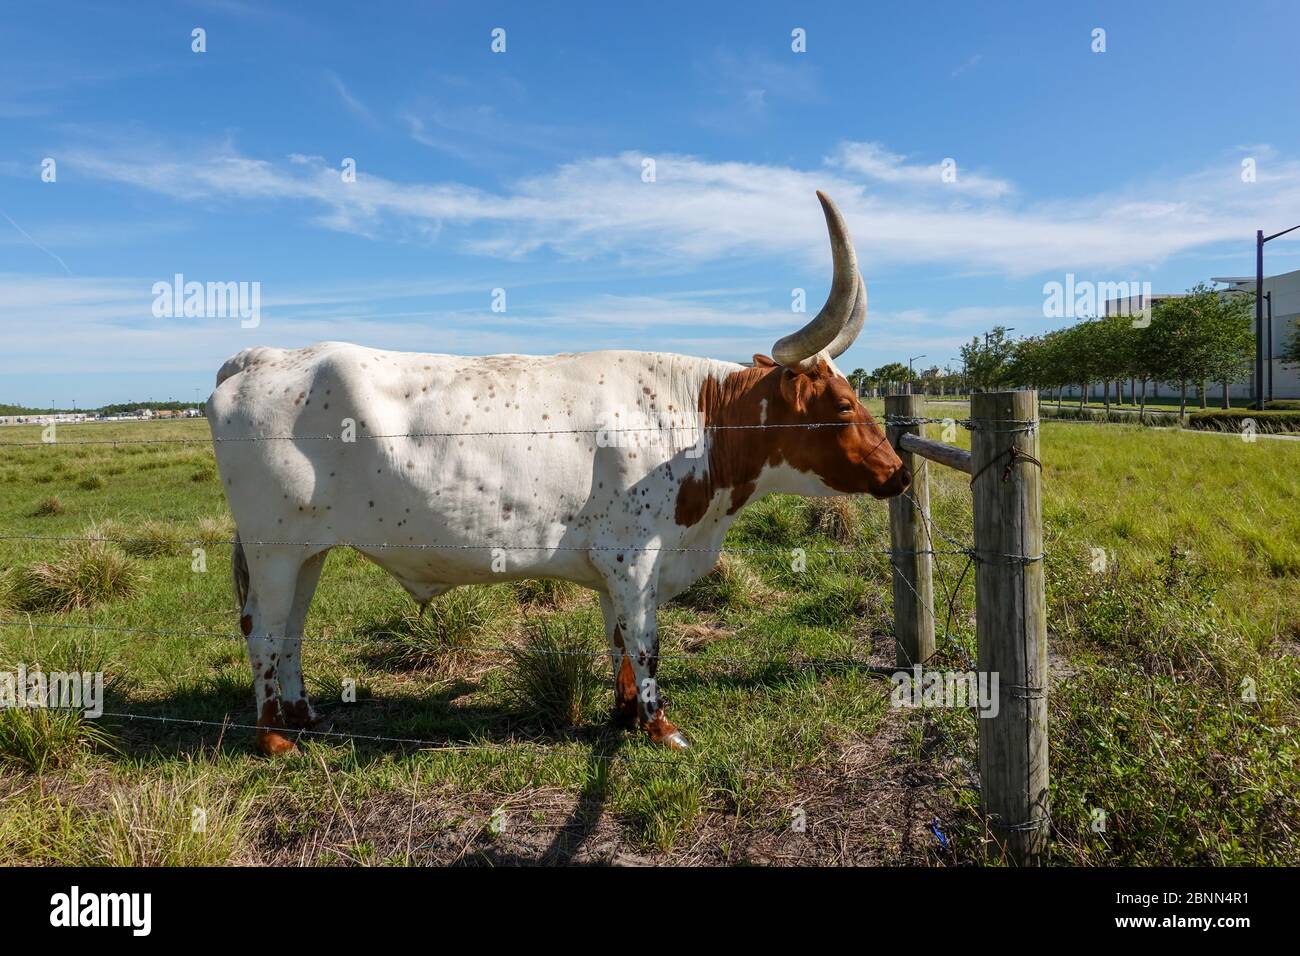 Longhorn Cattle grazing in a pasture in the Laureate Park neighborhood of Lake Nona in Orlando, Florida. Stock Photo